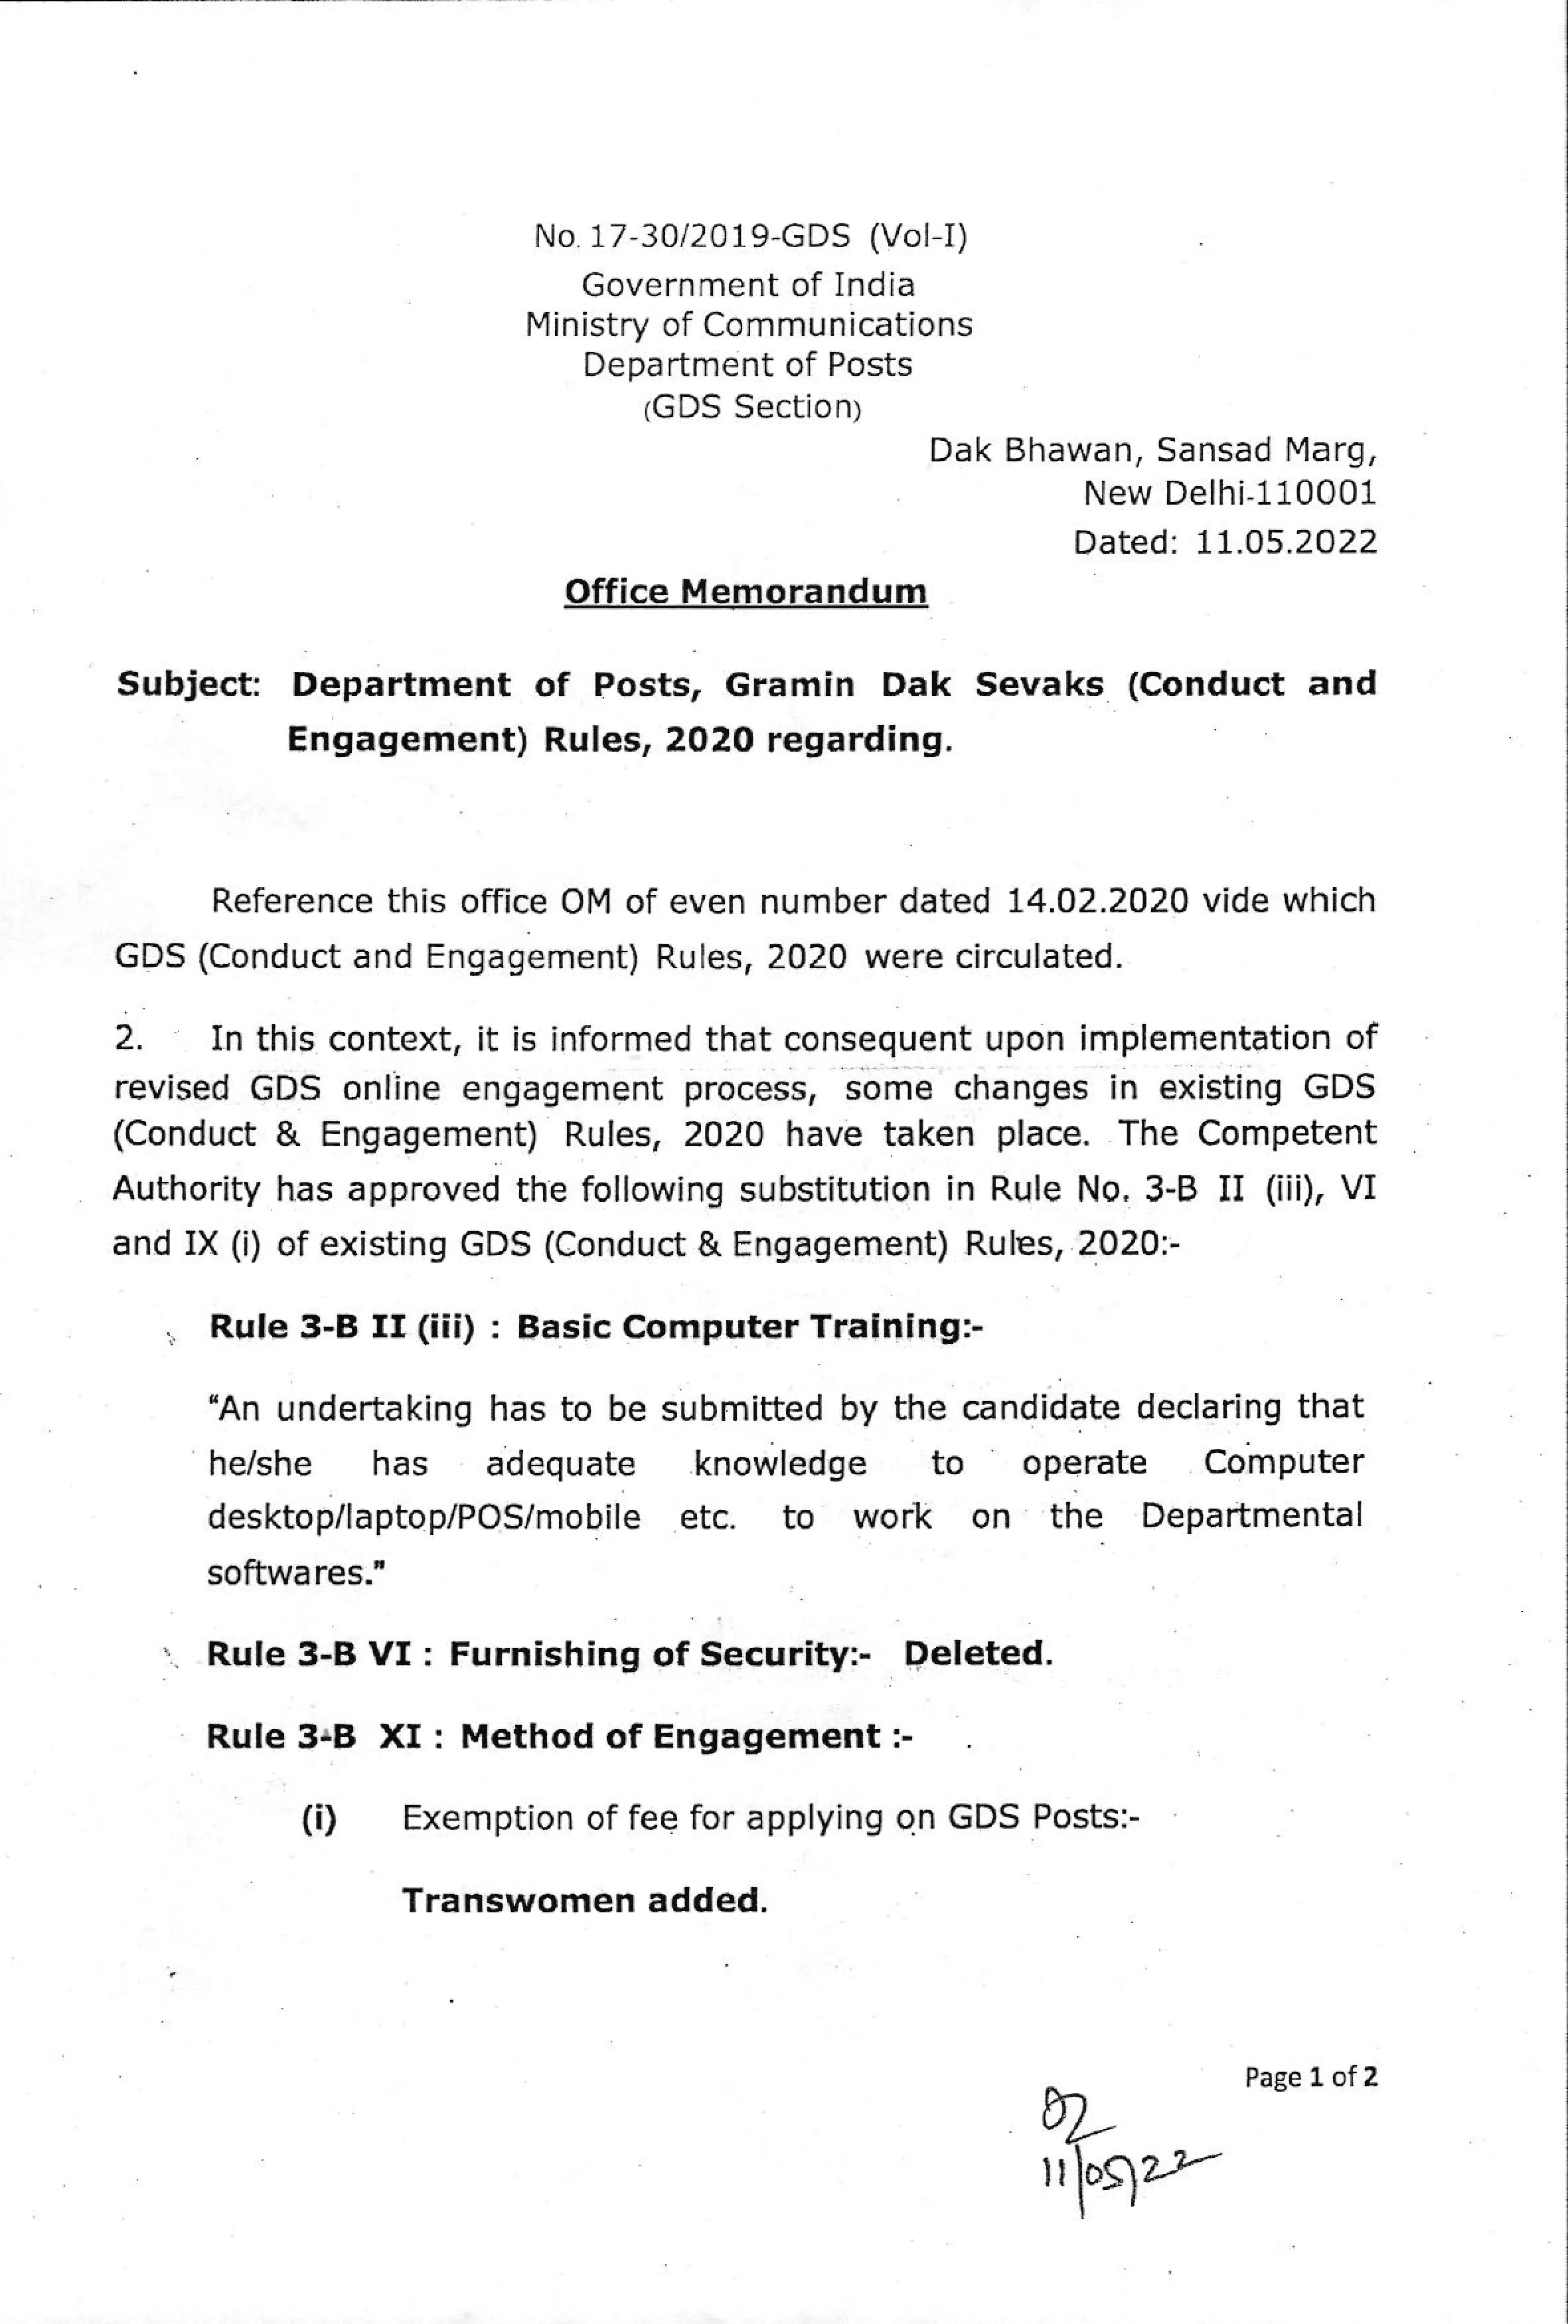 Revised Gramin Dak Sevaks (GDS) (Conduct and Engagement) Rules, 2020 | Amendment to GDS CE Rules 2020 | Dated 11.05.2022